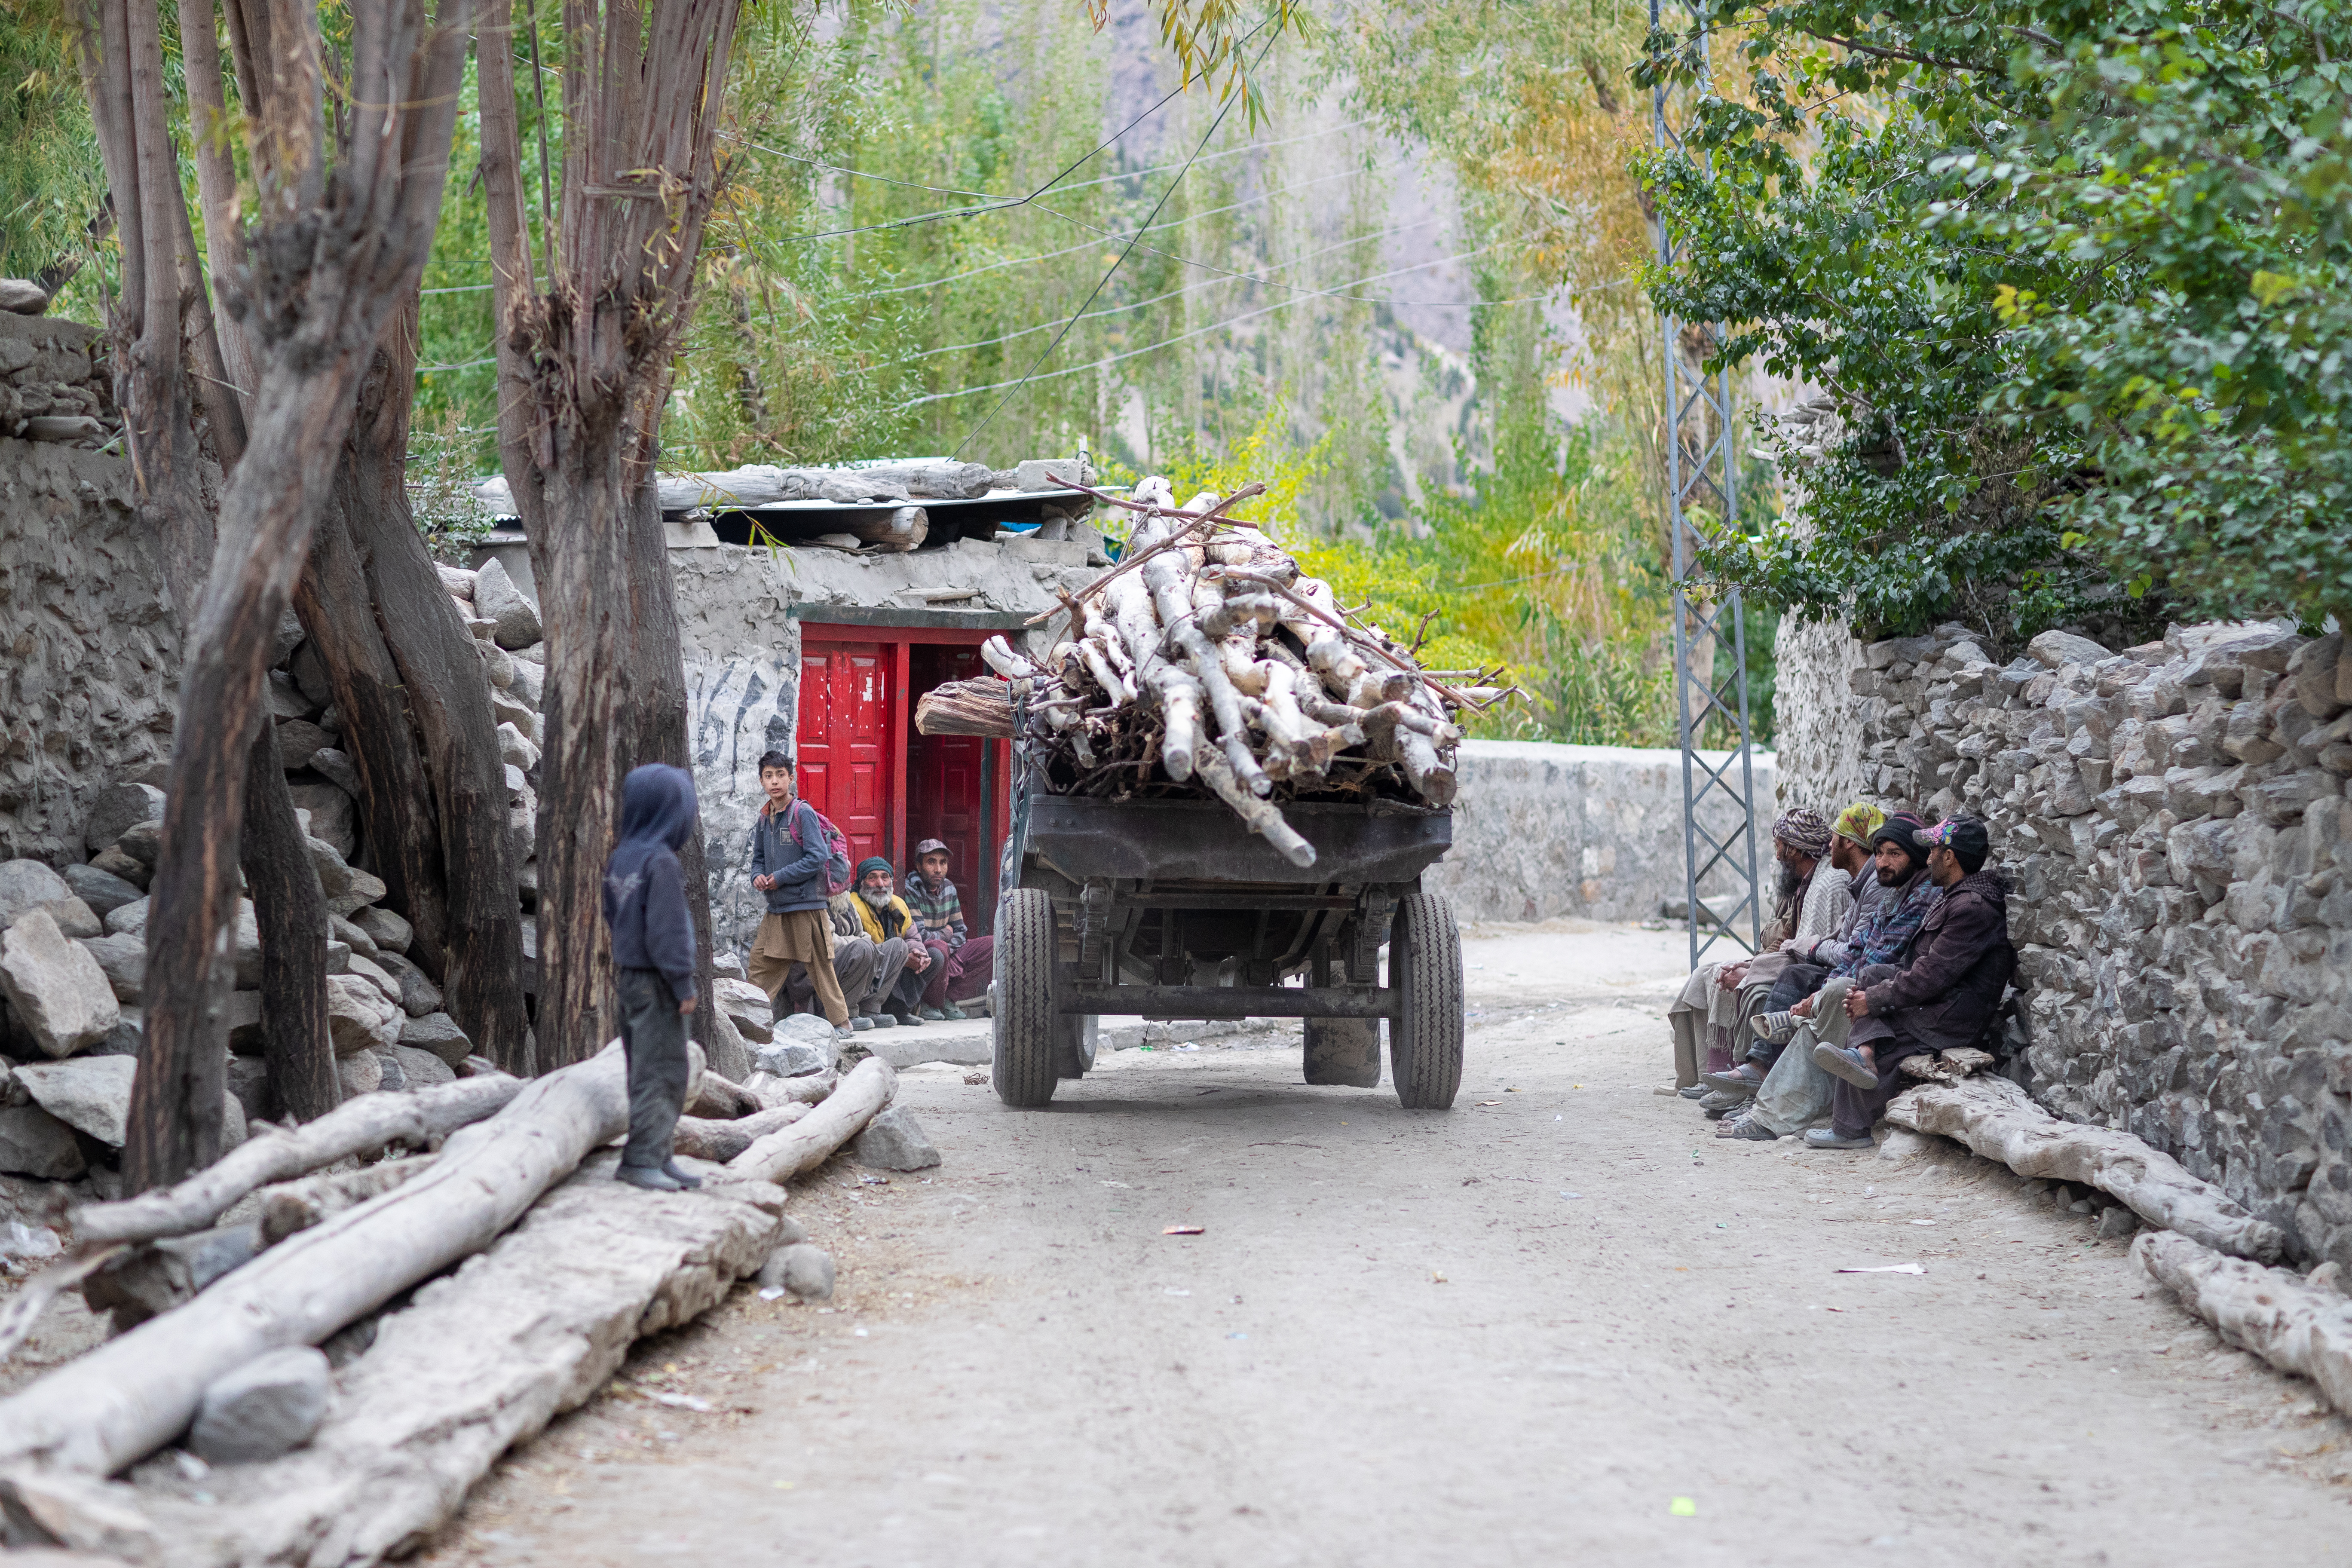 truck carrying woods with villagers standing and sitting around in Hushe Valley